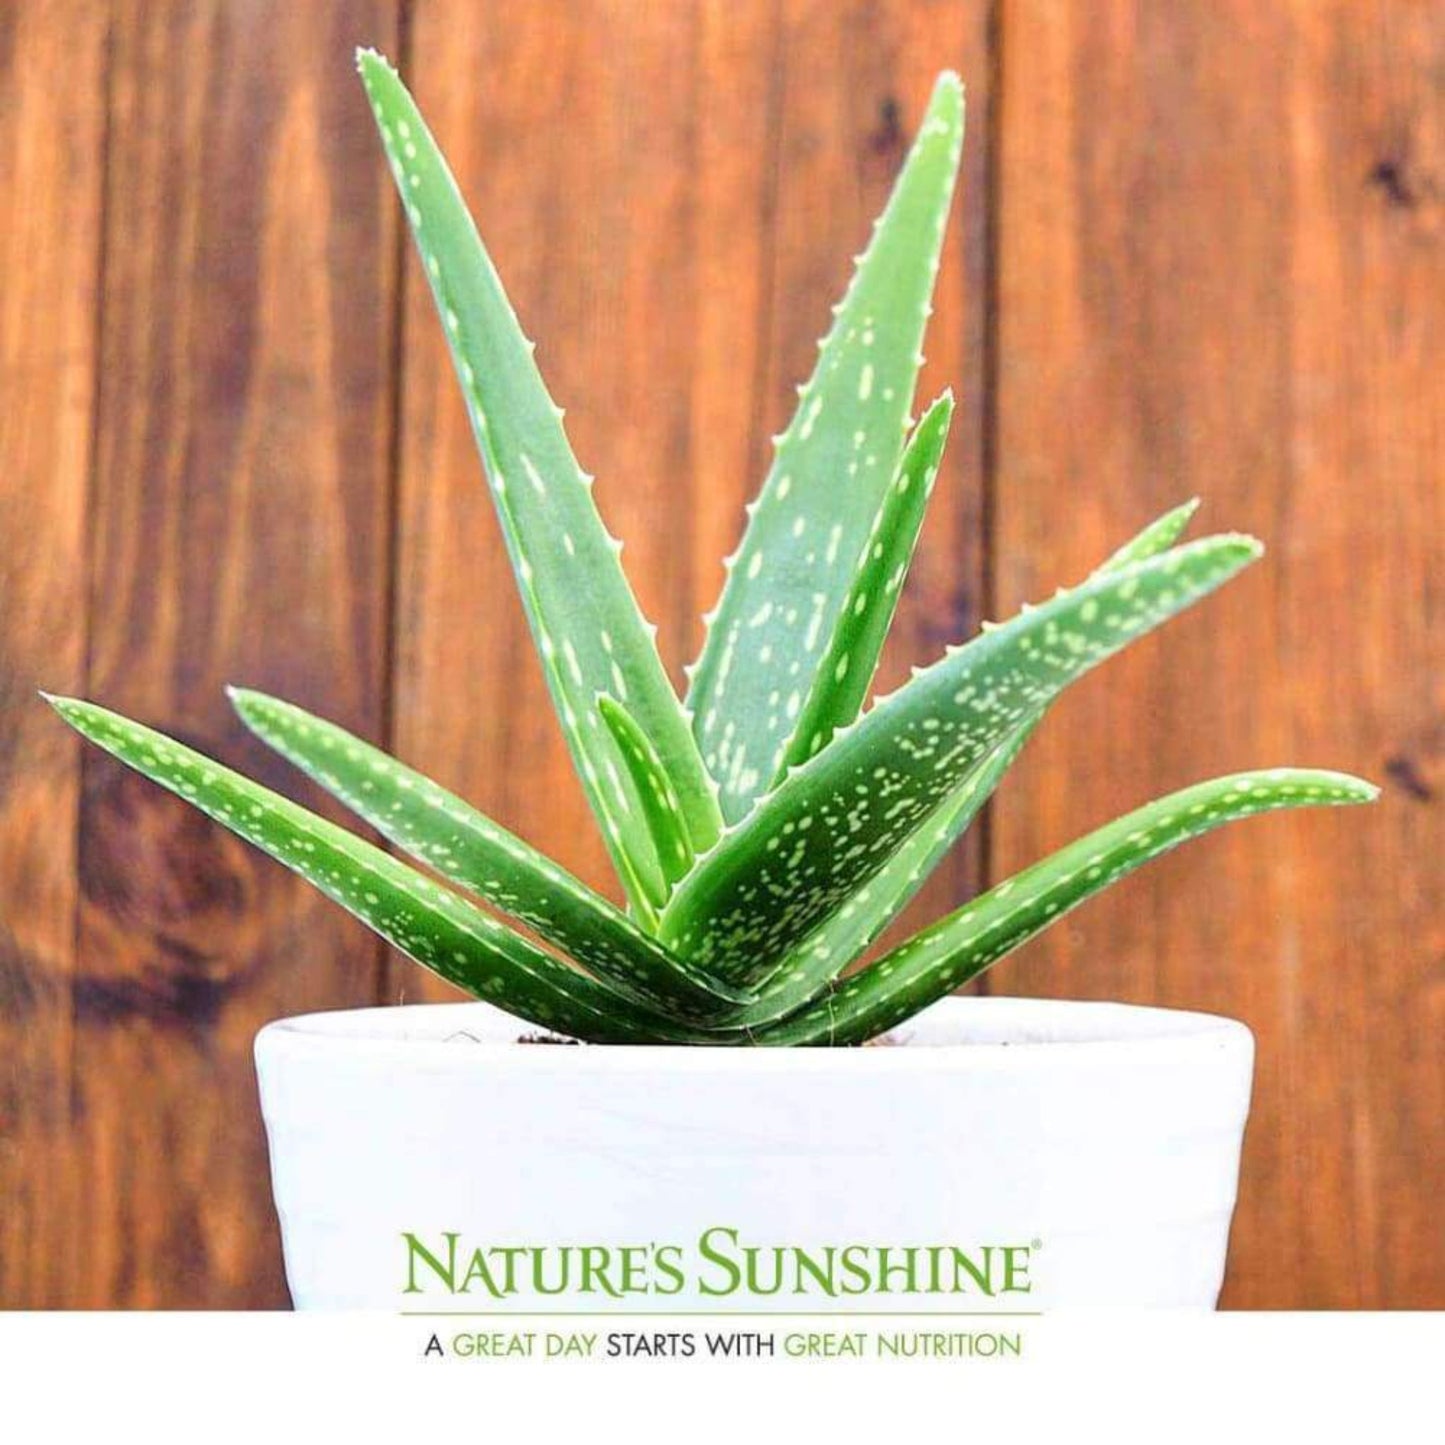 Aloe Vera plant with Nature's Sunshine logo on the container